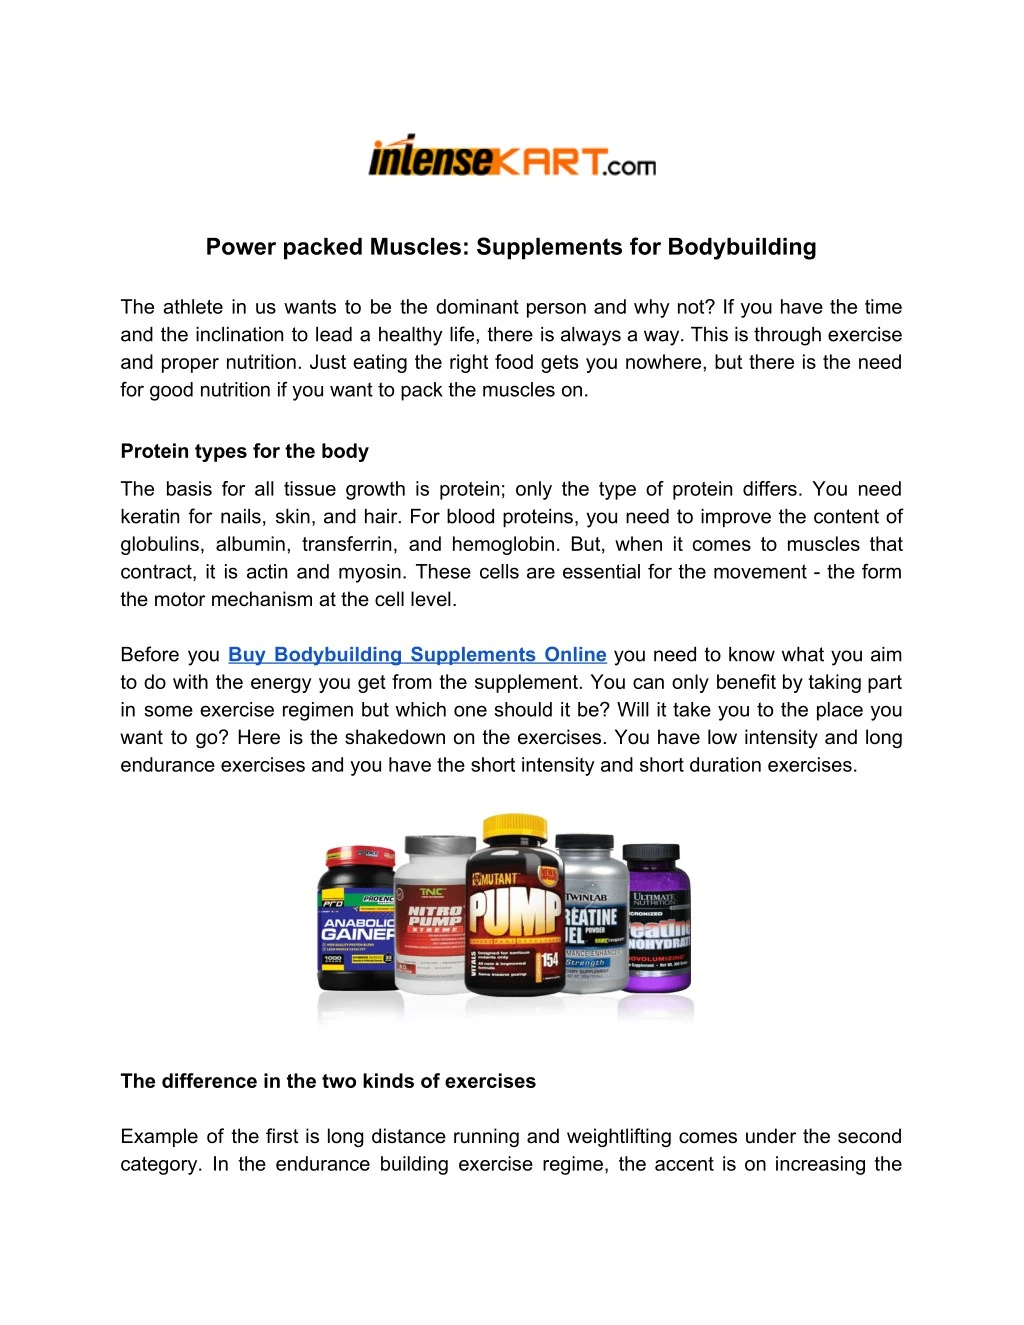 power packed muscles supplements for bodybuilding